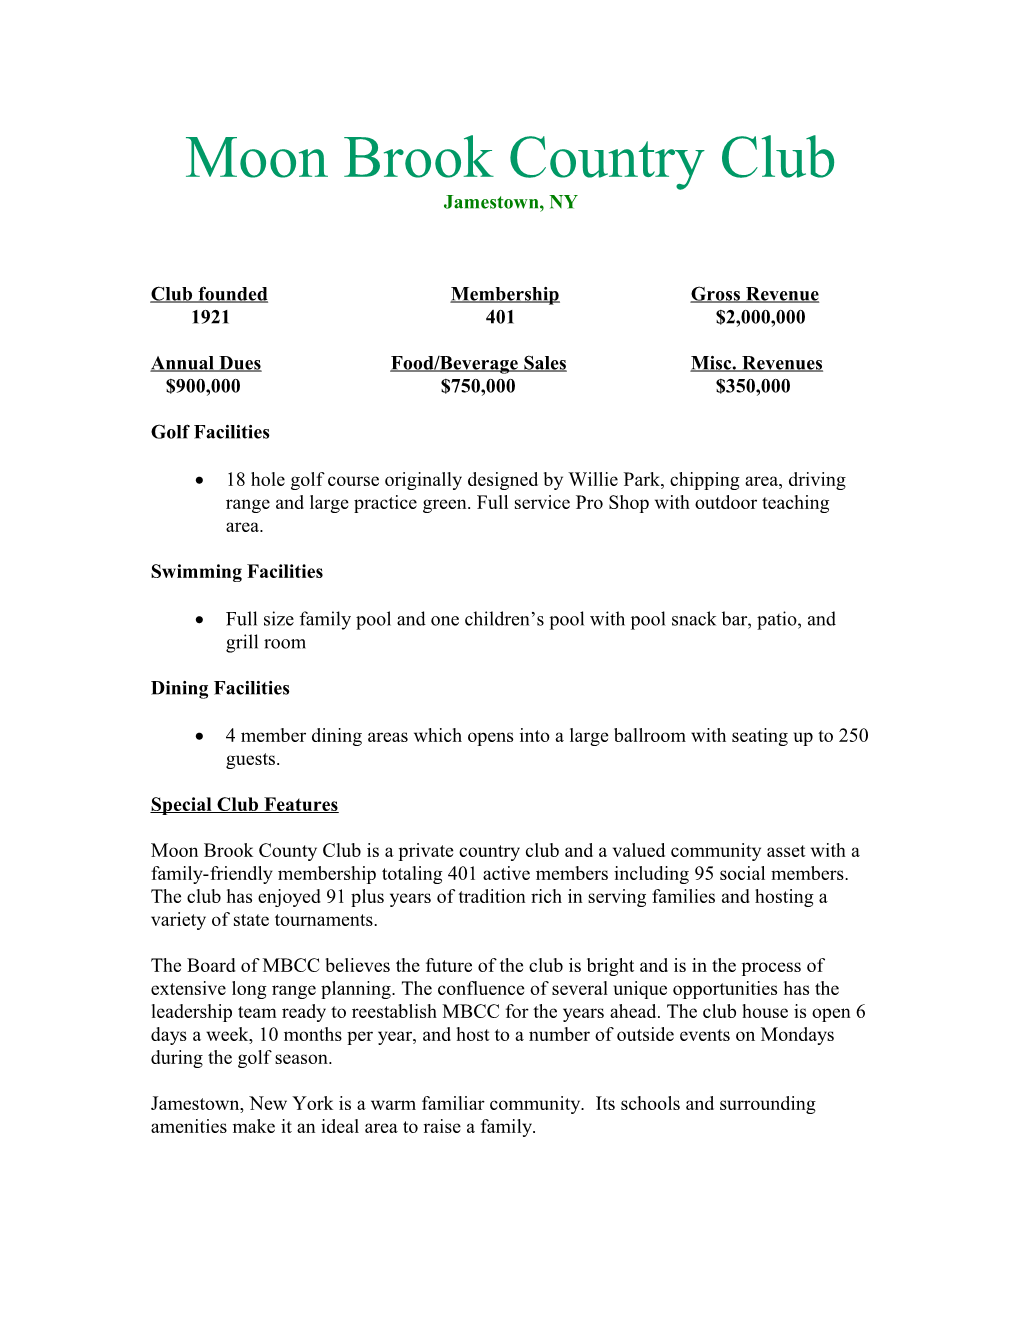 Moon Brook Country Club